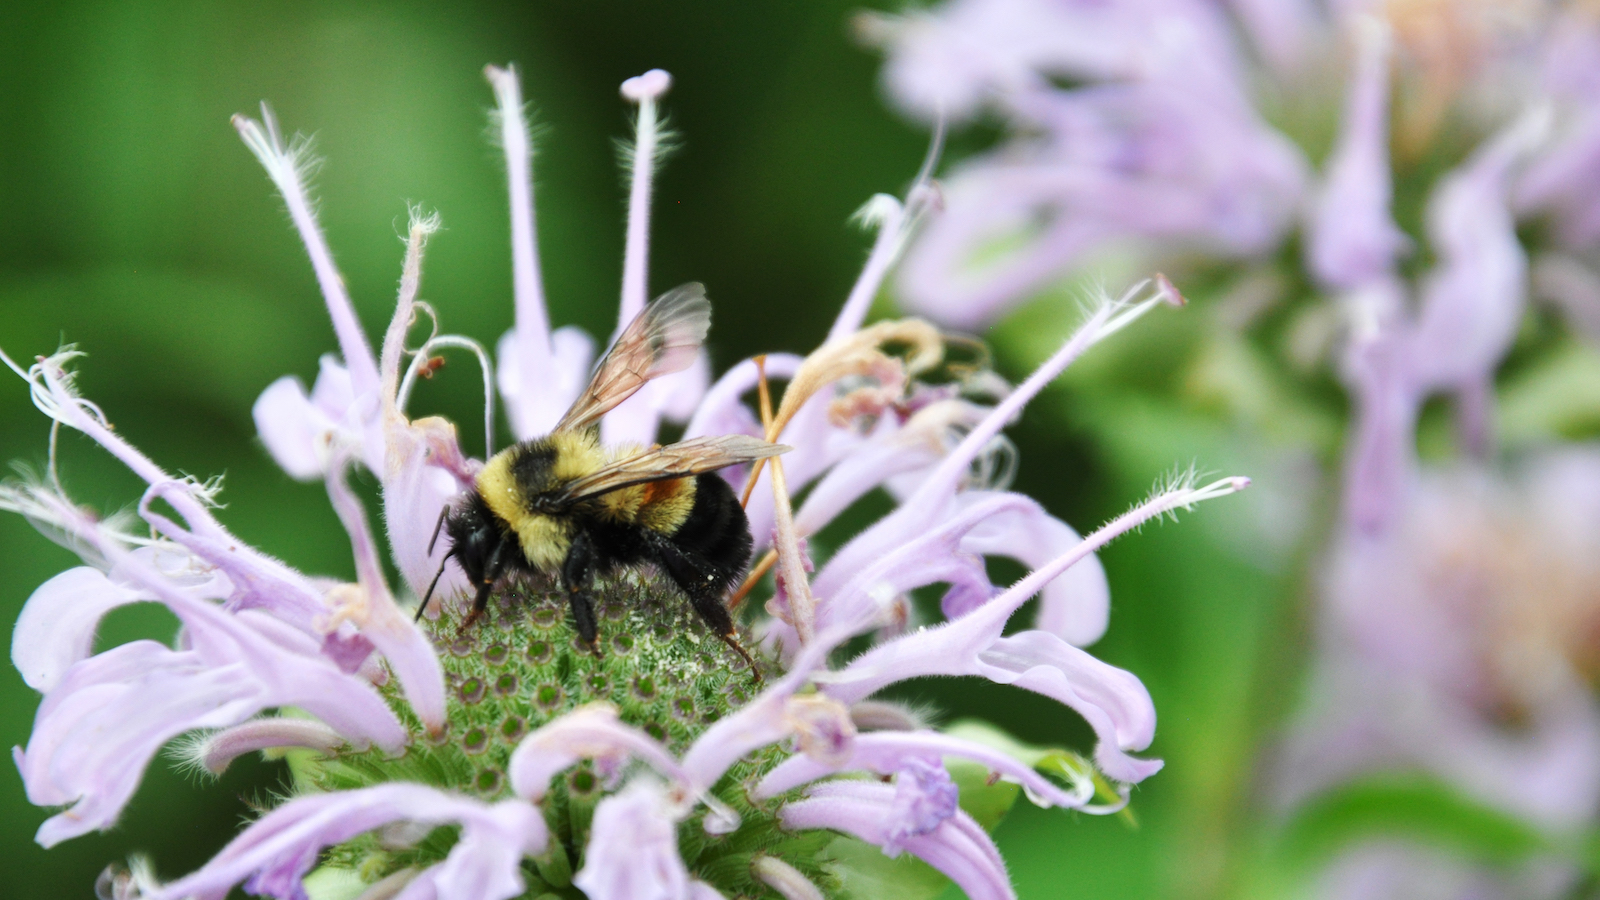 Bee on flower with overlying text reading "Rusty Patched Bumblebee"